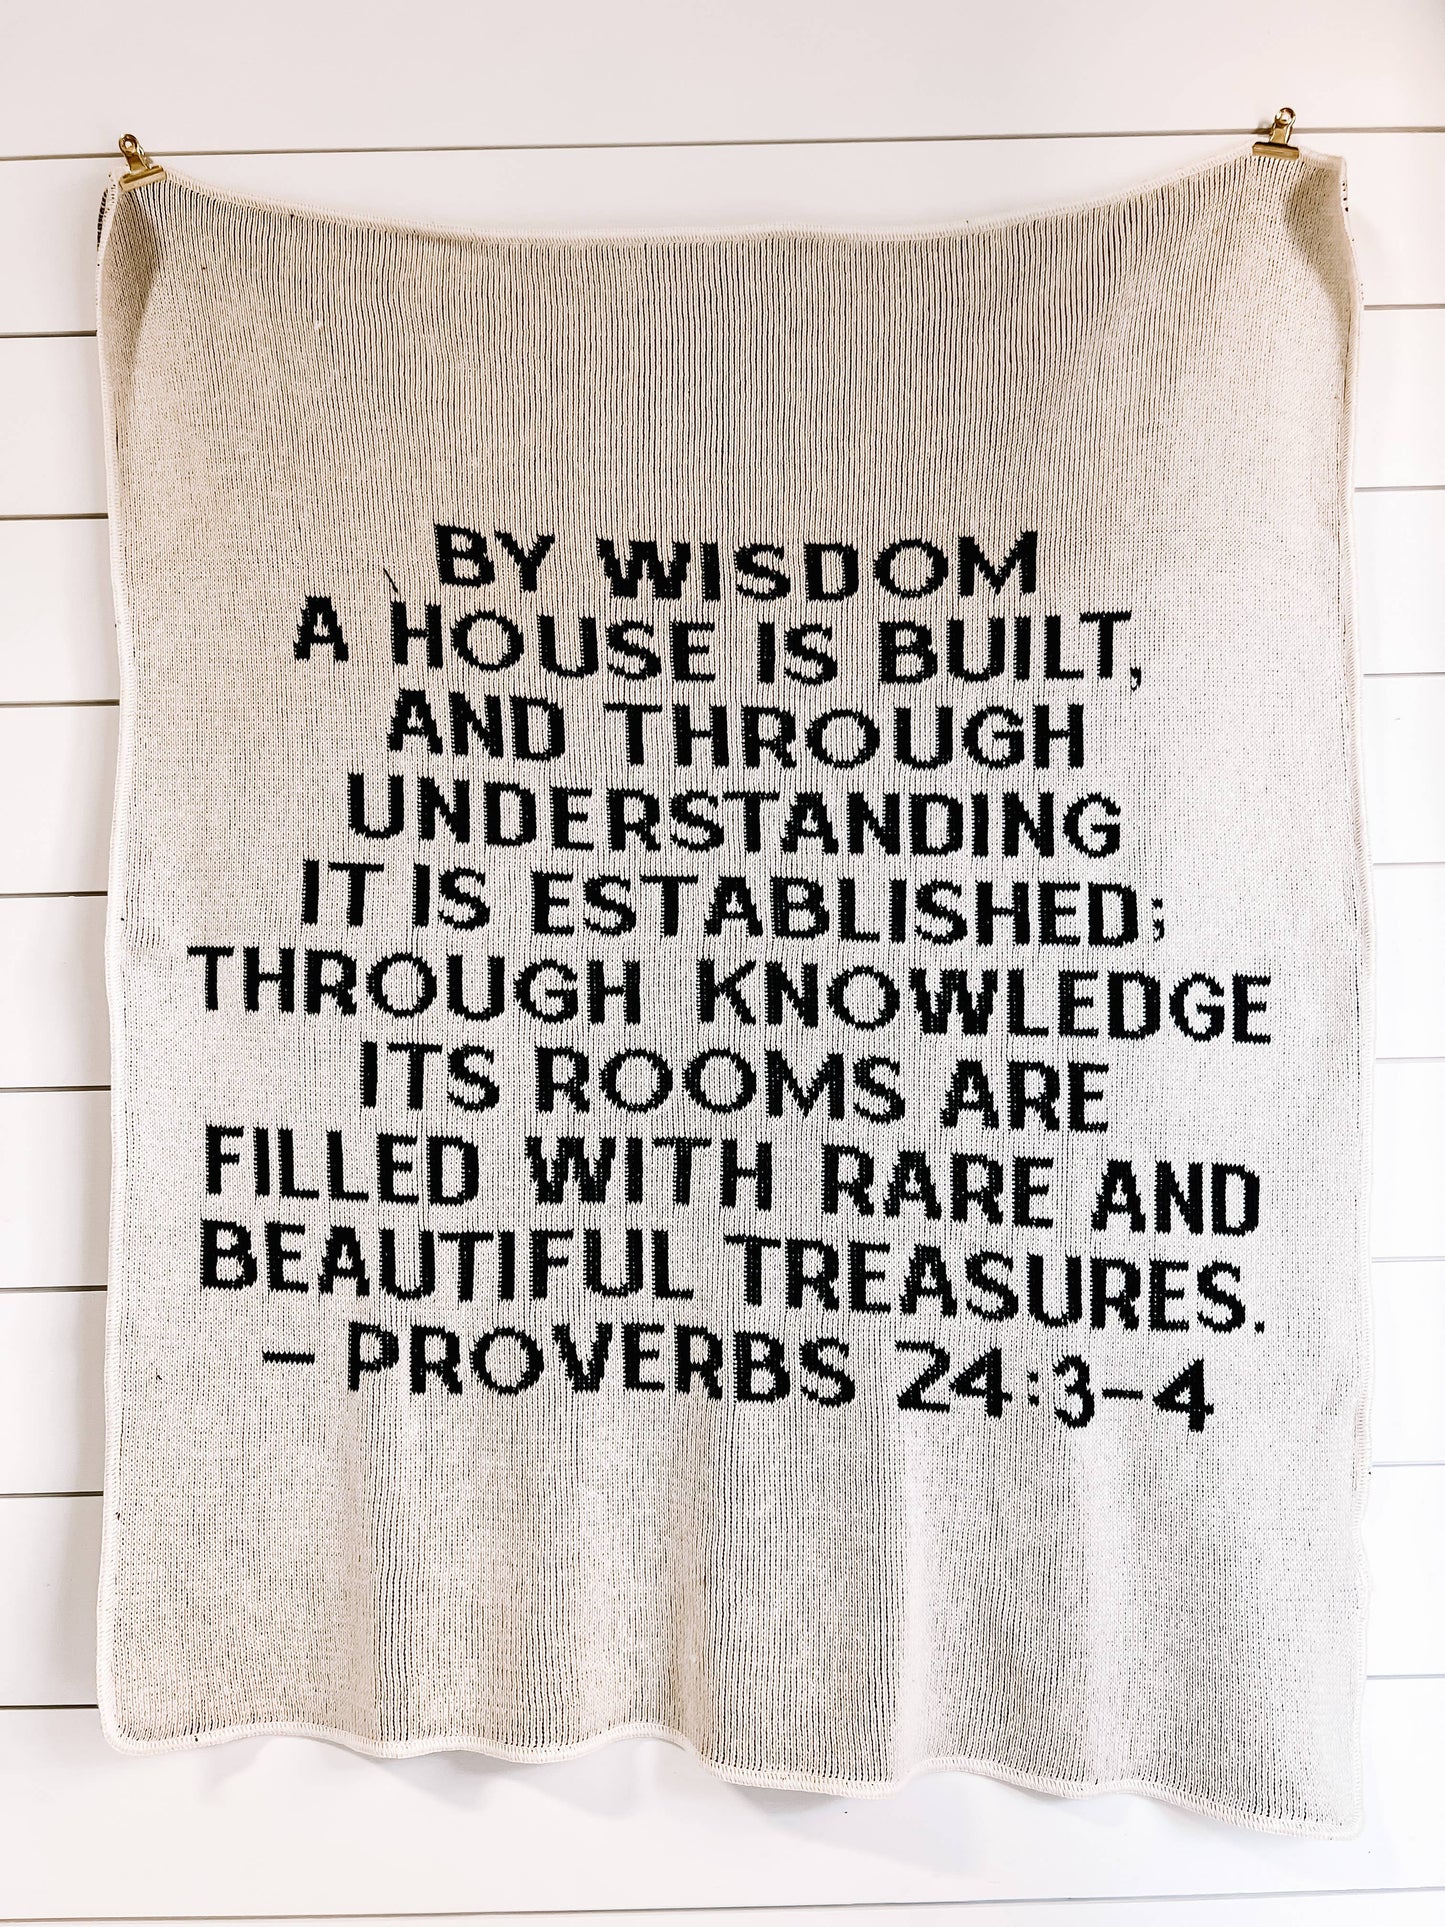 Made in the USA | Proverbs 24:3-4 Block Knit Throw | Natural: Throw Size 50"x60"